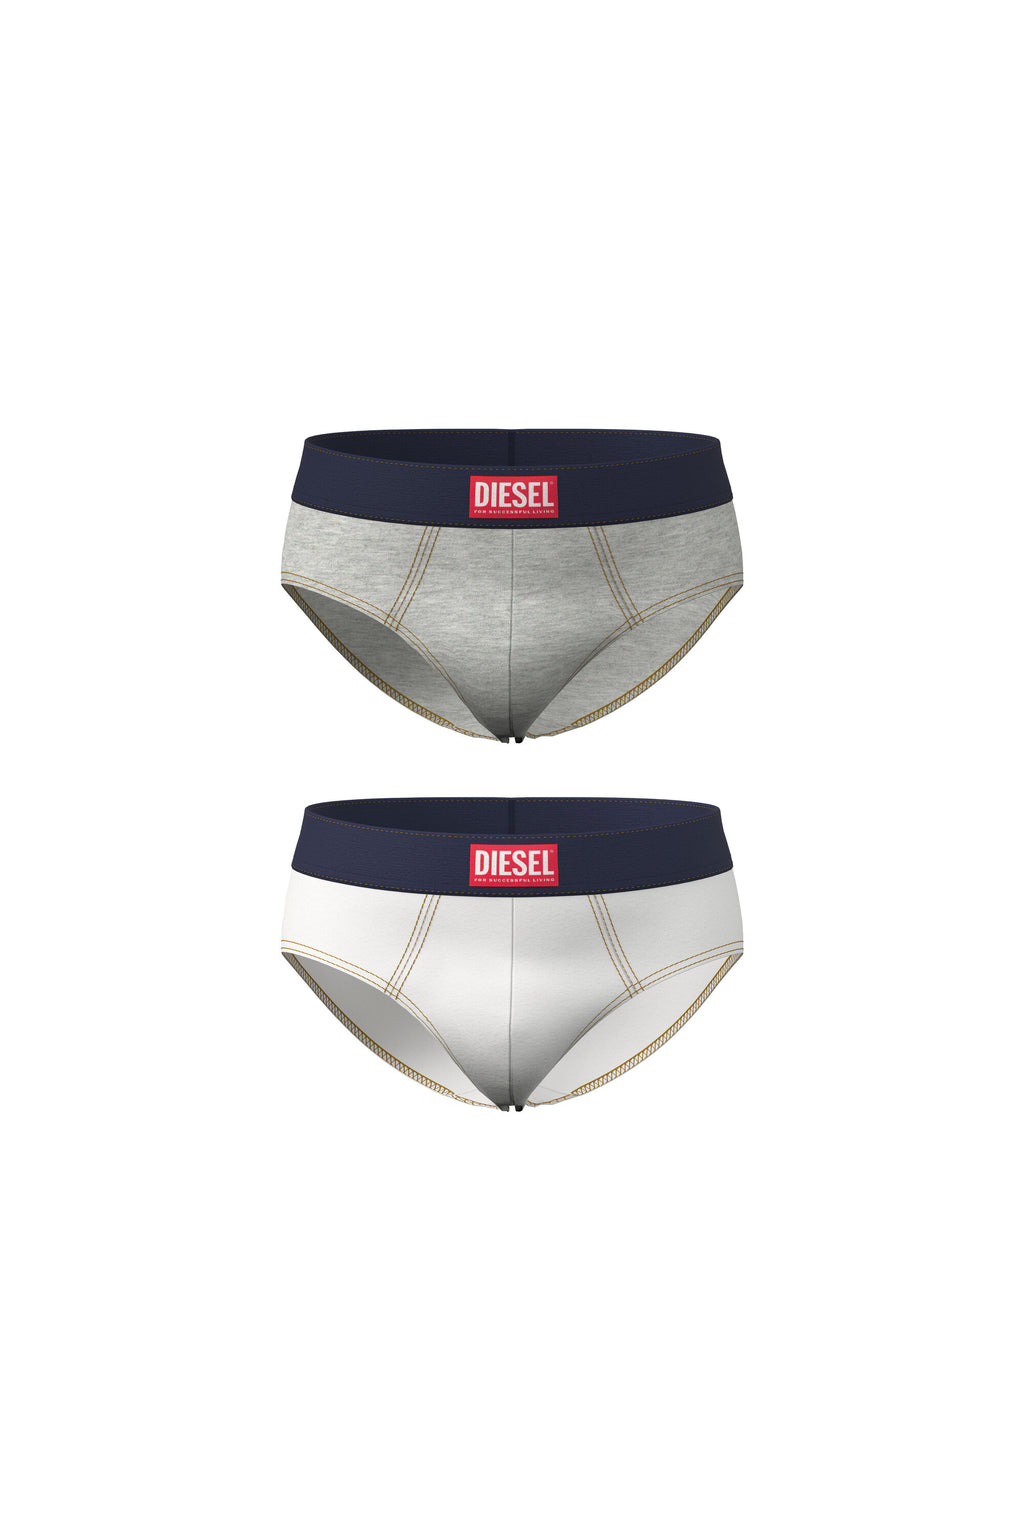 Set of 2 briefs with contrasting Diesel logo